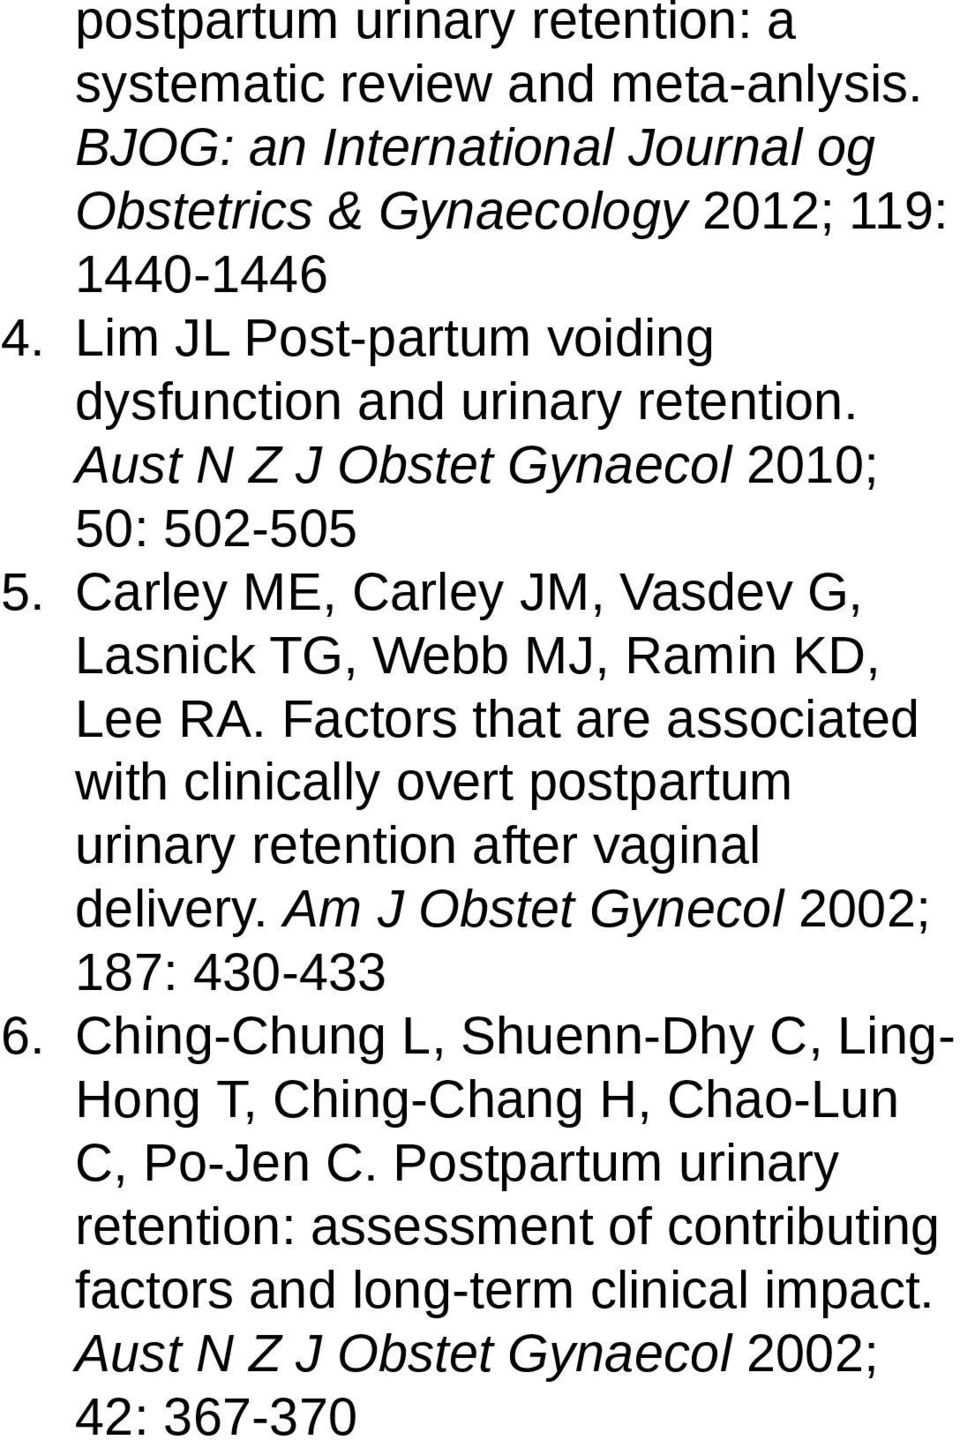 Carley ME, Carley JM, Vasdev G, Lasnick TG, Webb MJ, Ramin KD, Lee RA. Factors that are associated with clinically overt postpartum urinary retention after vaginal delivery.